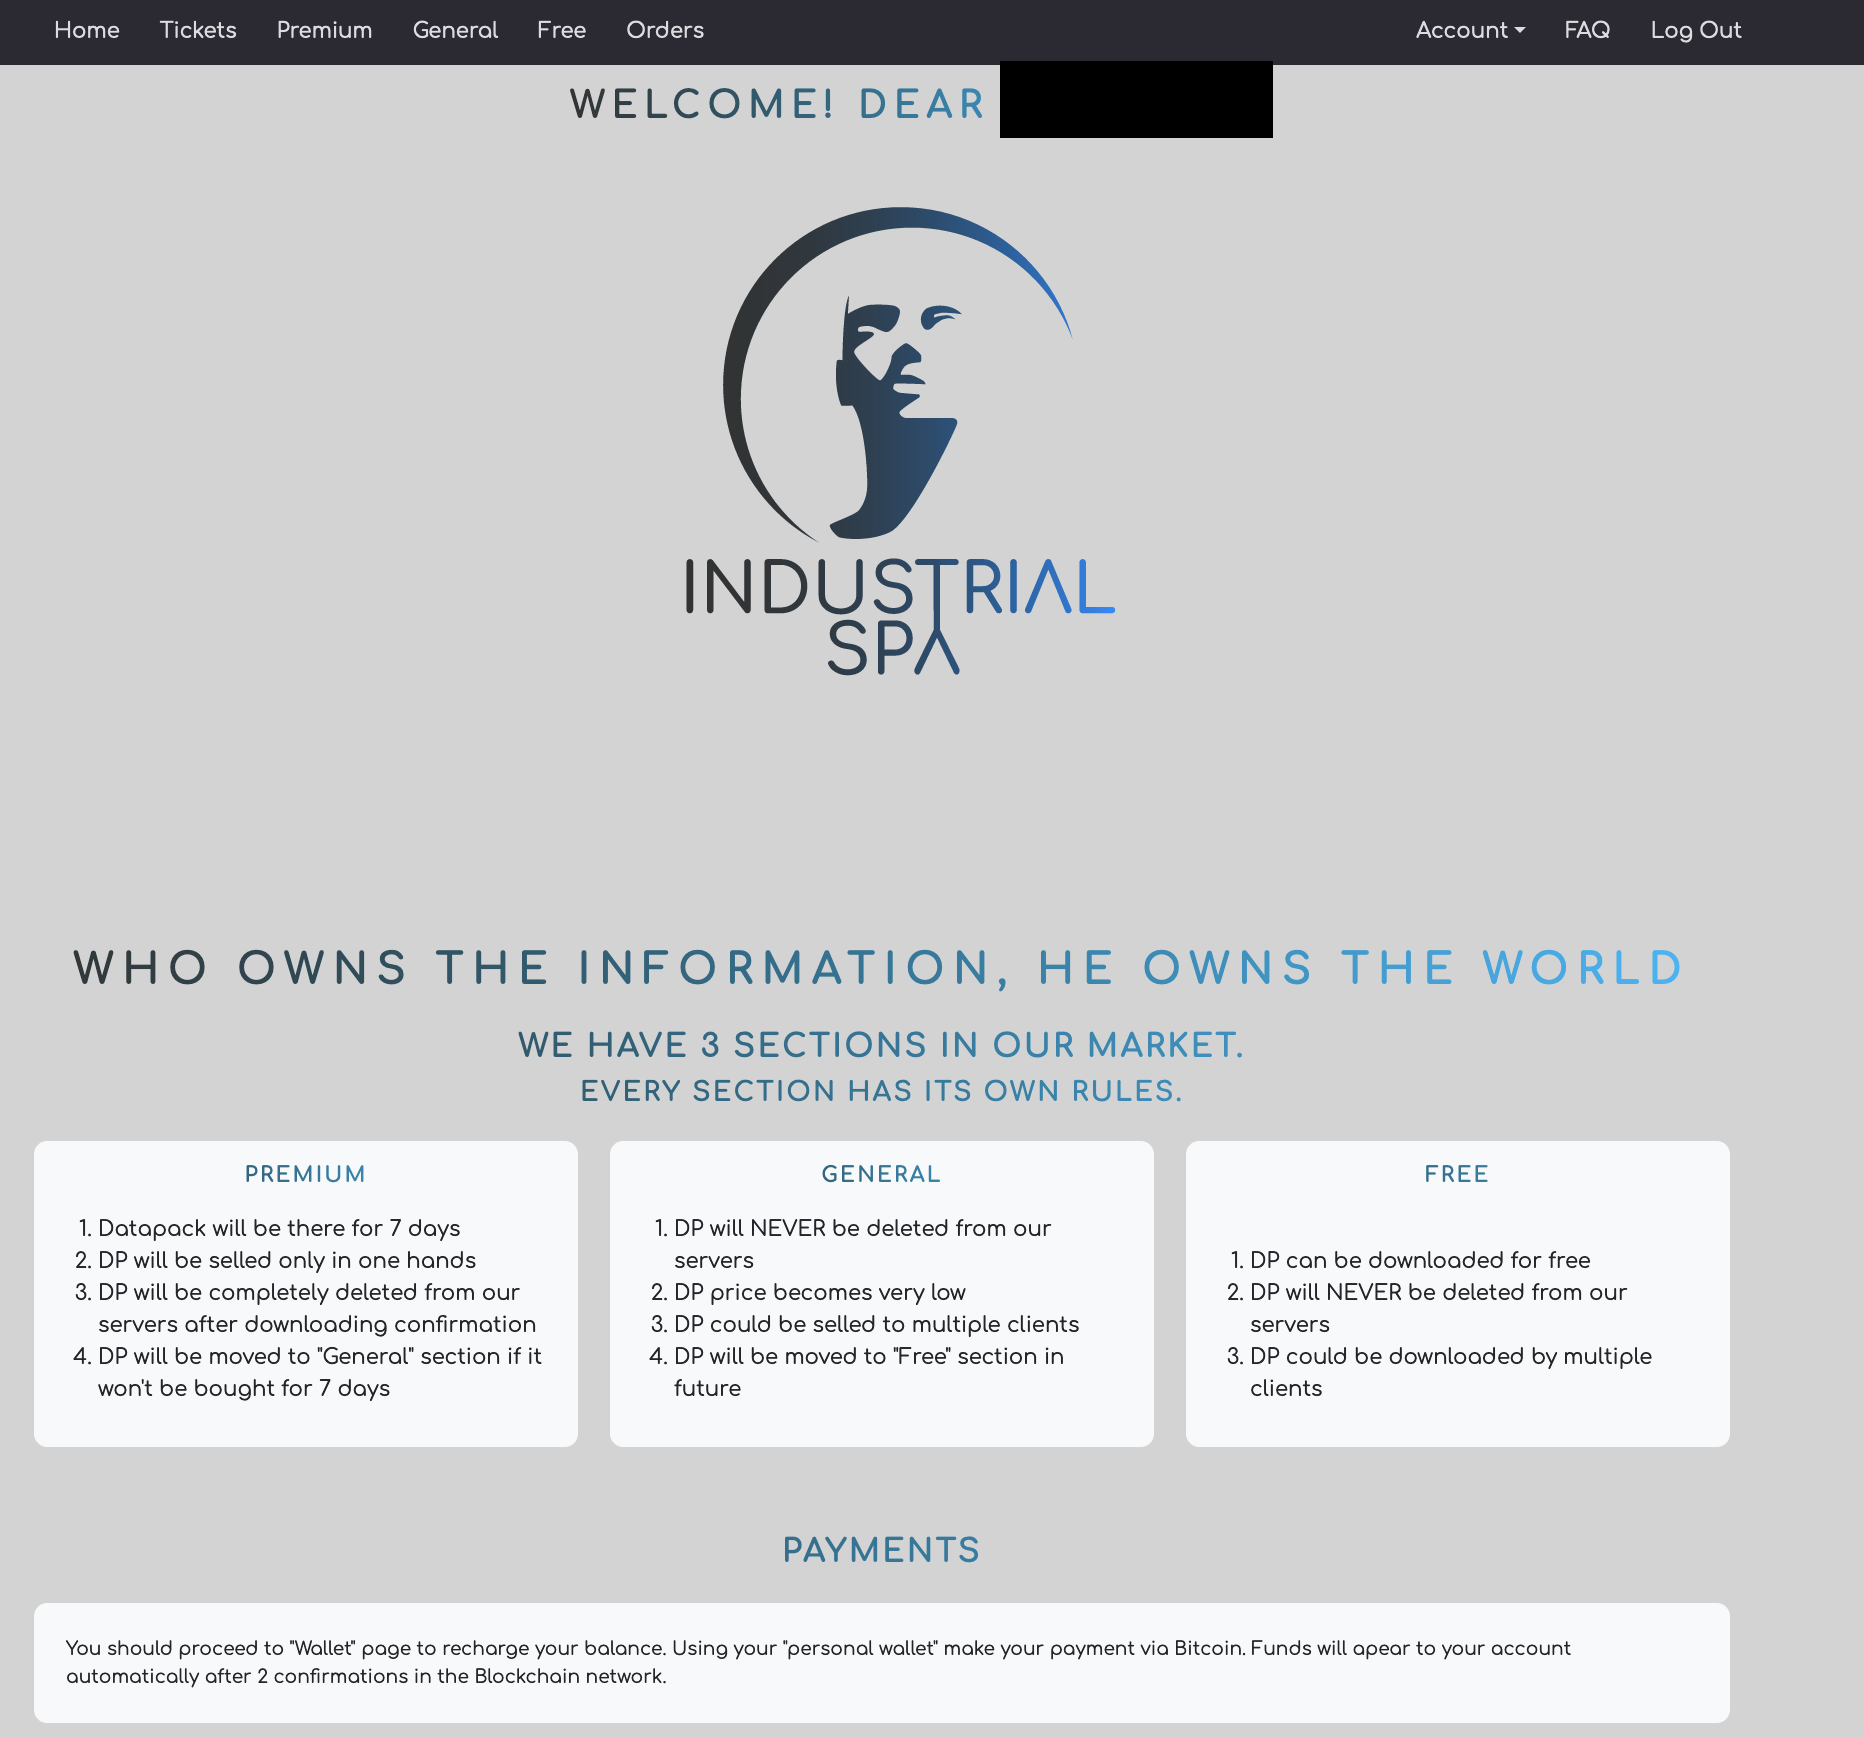 Industrial Spy landing page - "Who owns the information, he owns the world." The site is split into three sections: Premium, general and free. 